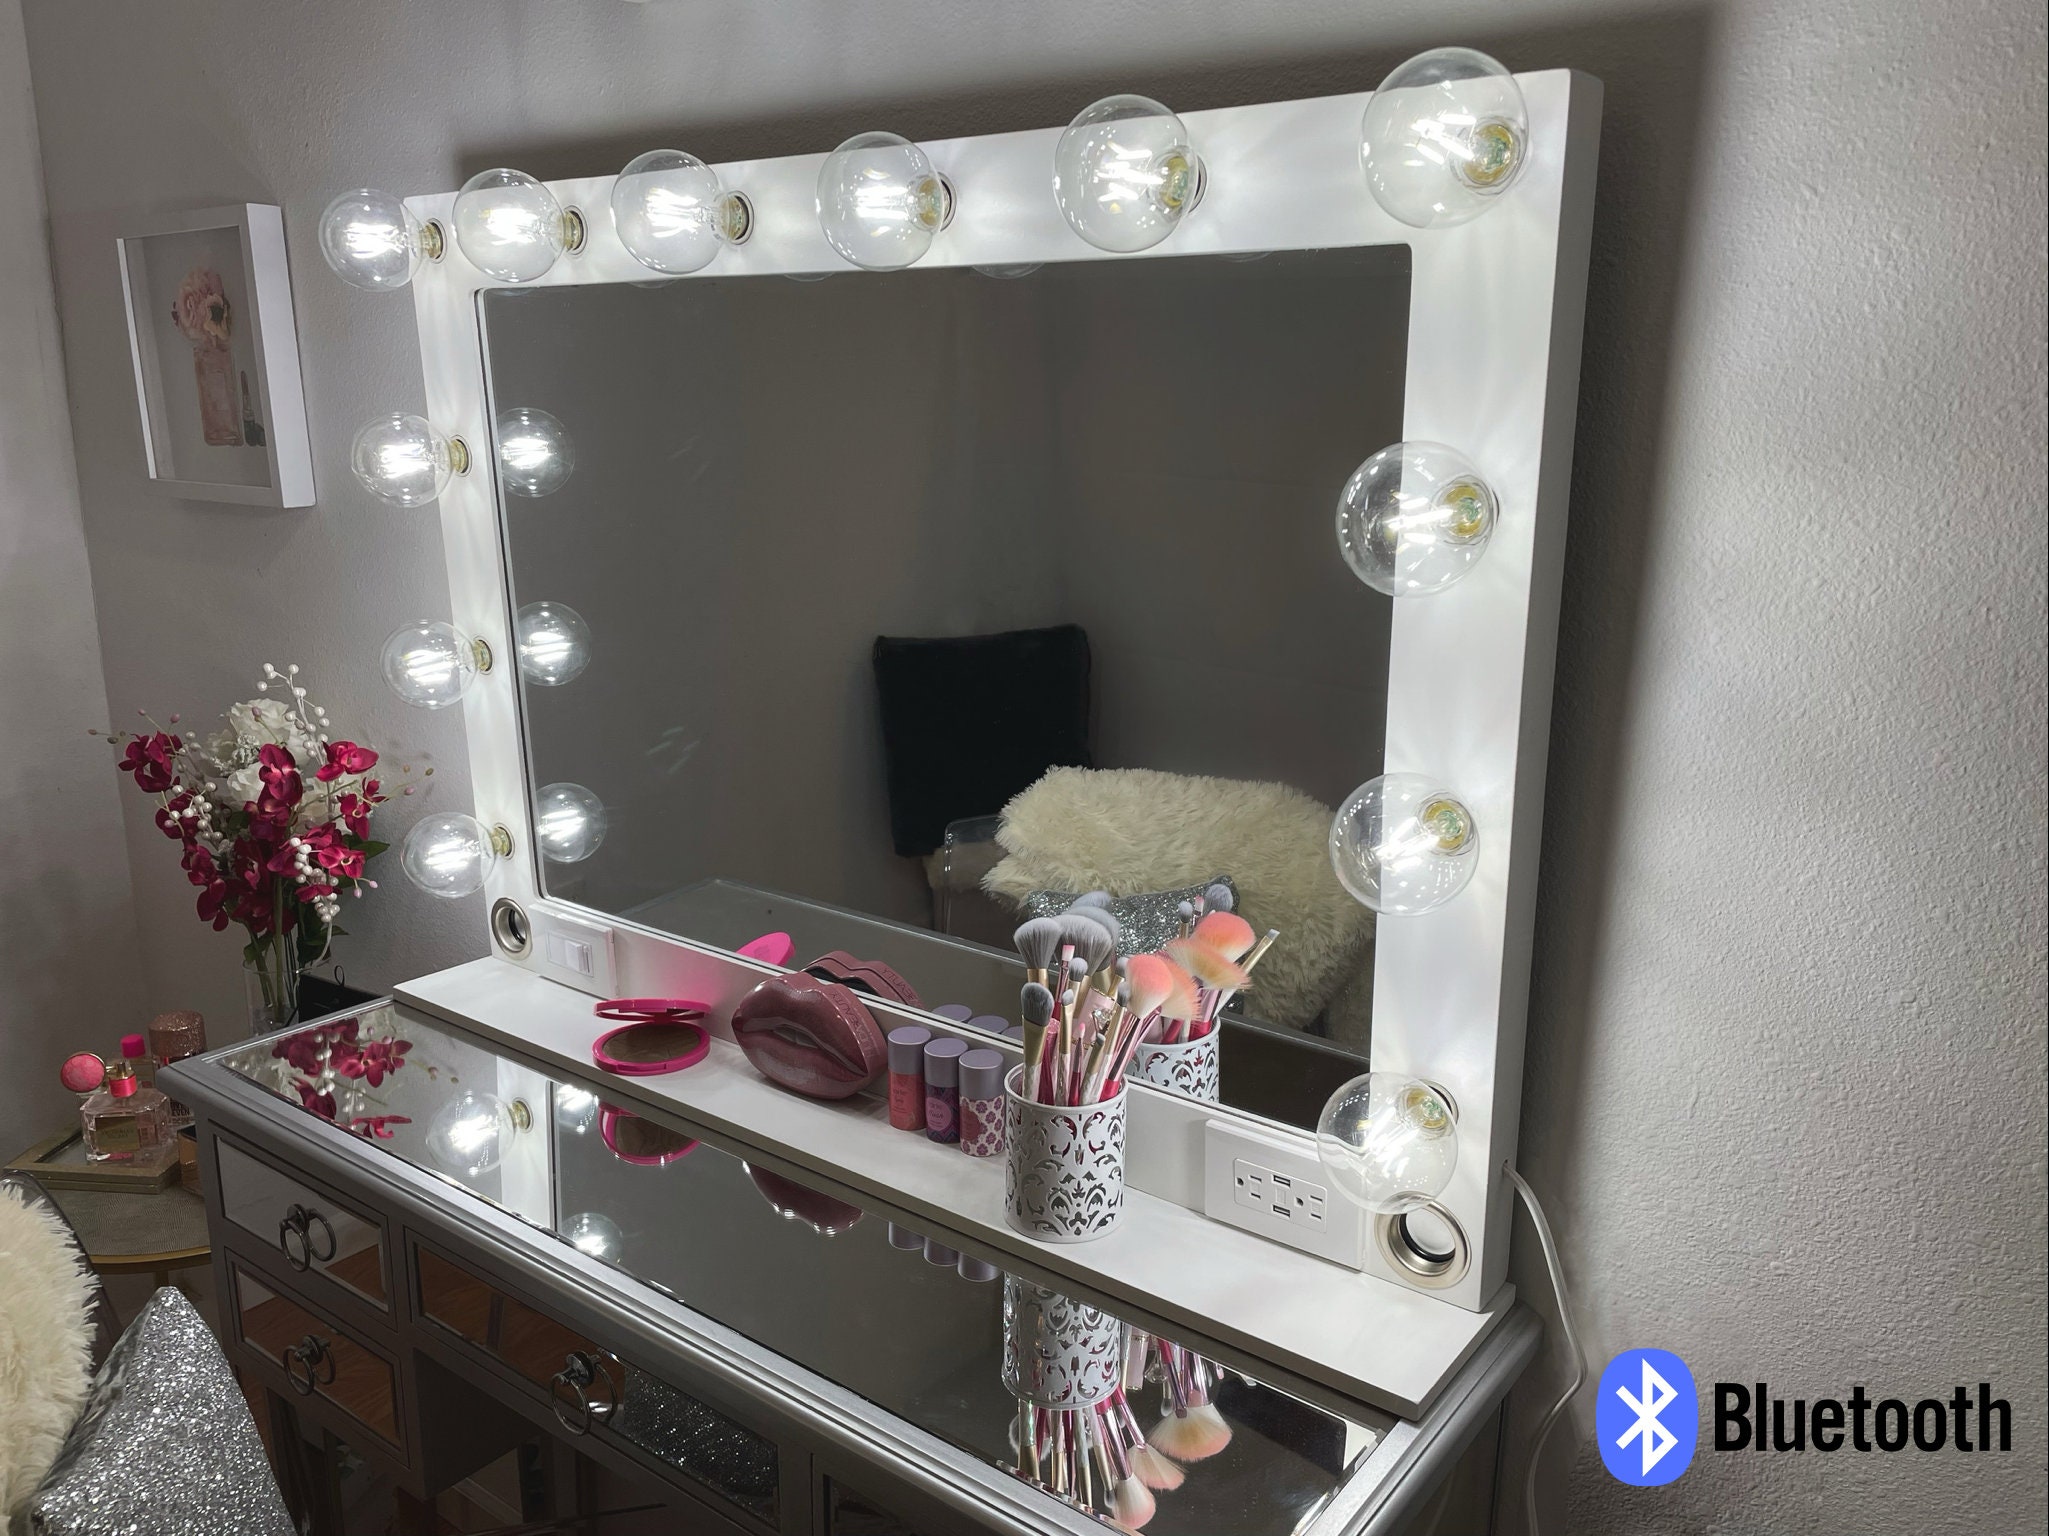 Bluetooth XL Vanity Mirror With Lights and USB 40 X 28 Made in the USA 